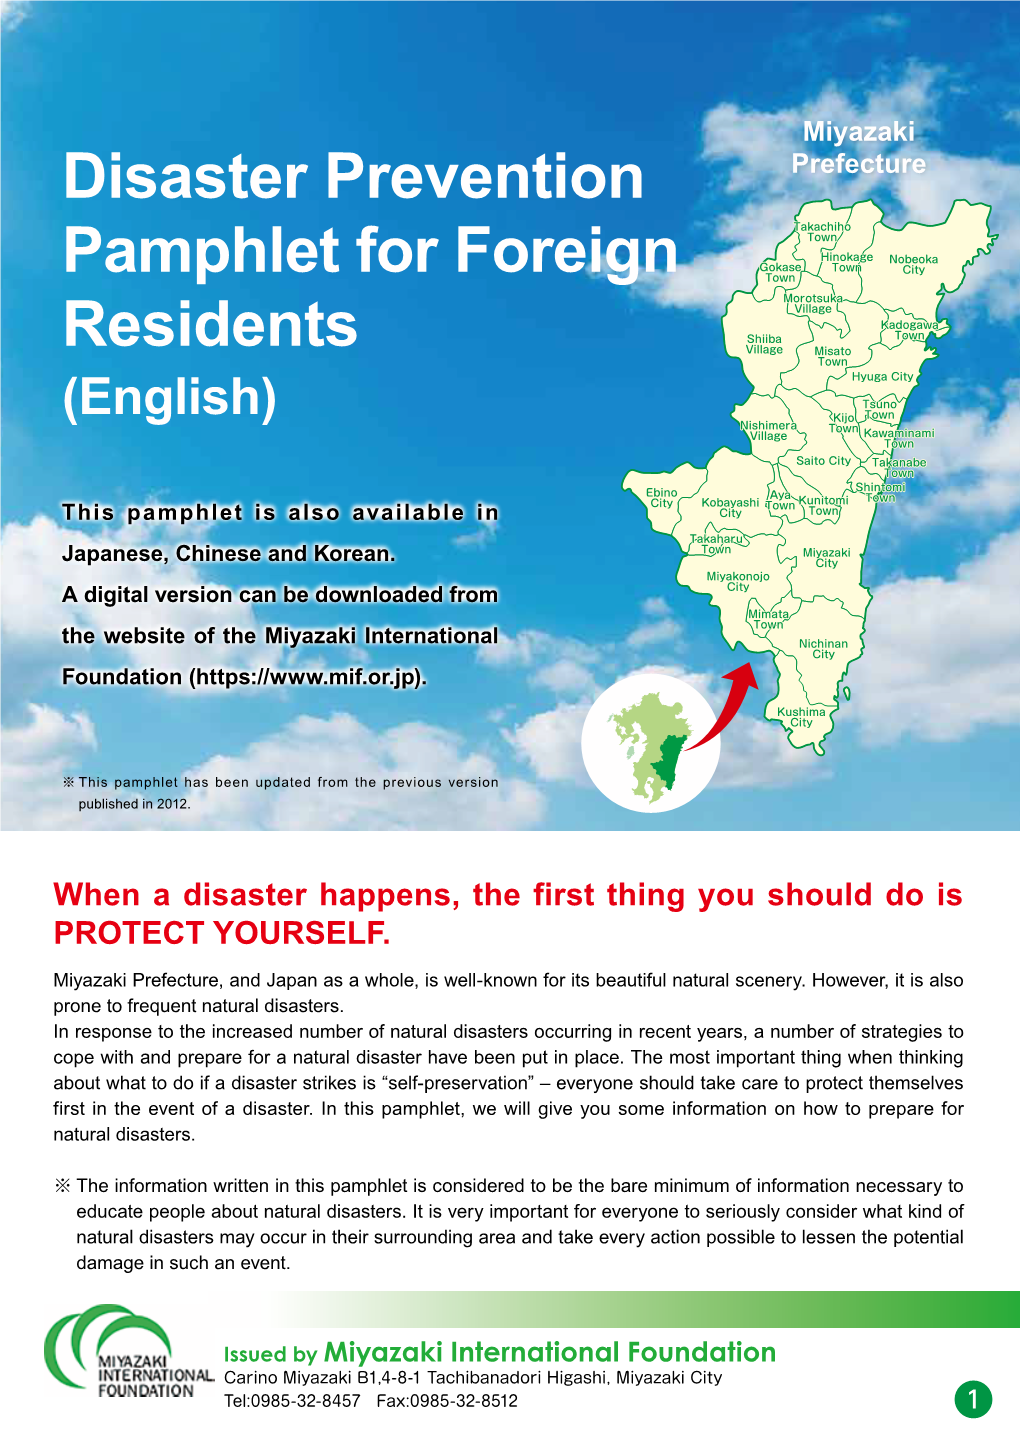 Disaster Prevention Pamphlet for Foreign Residents